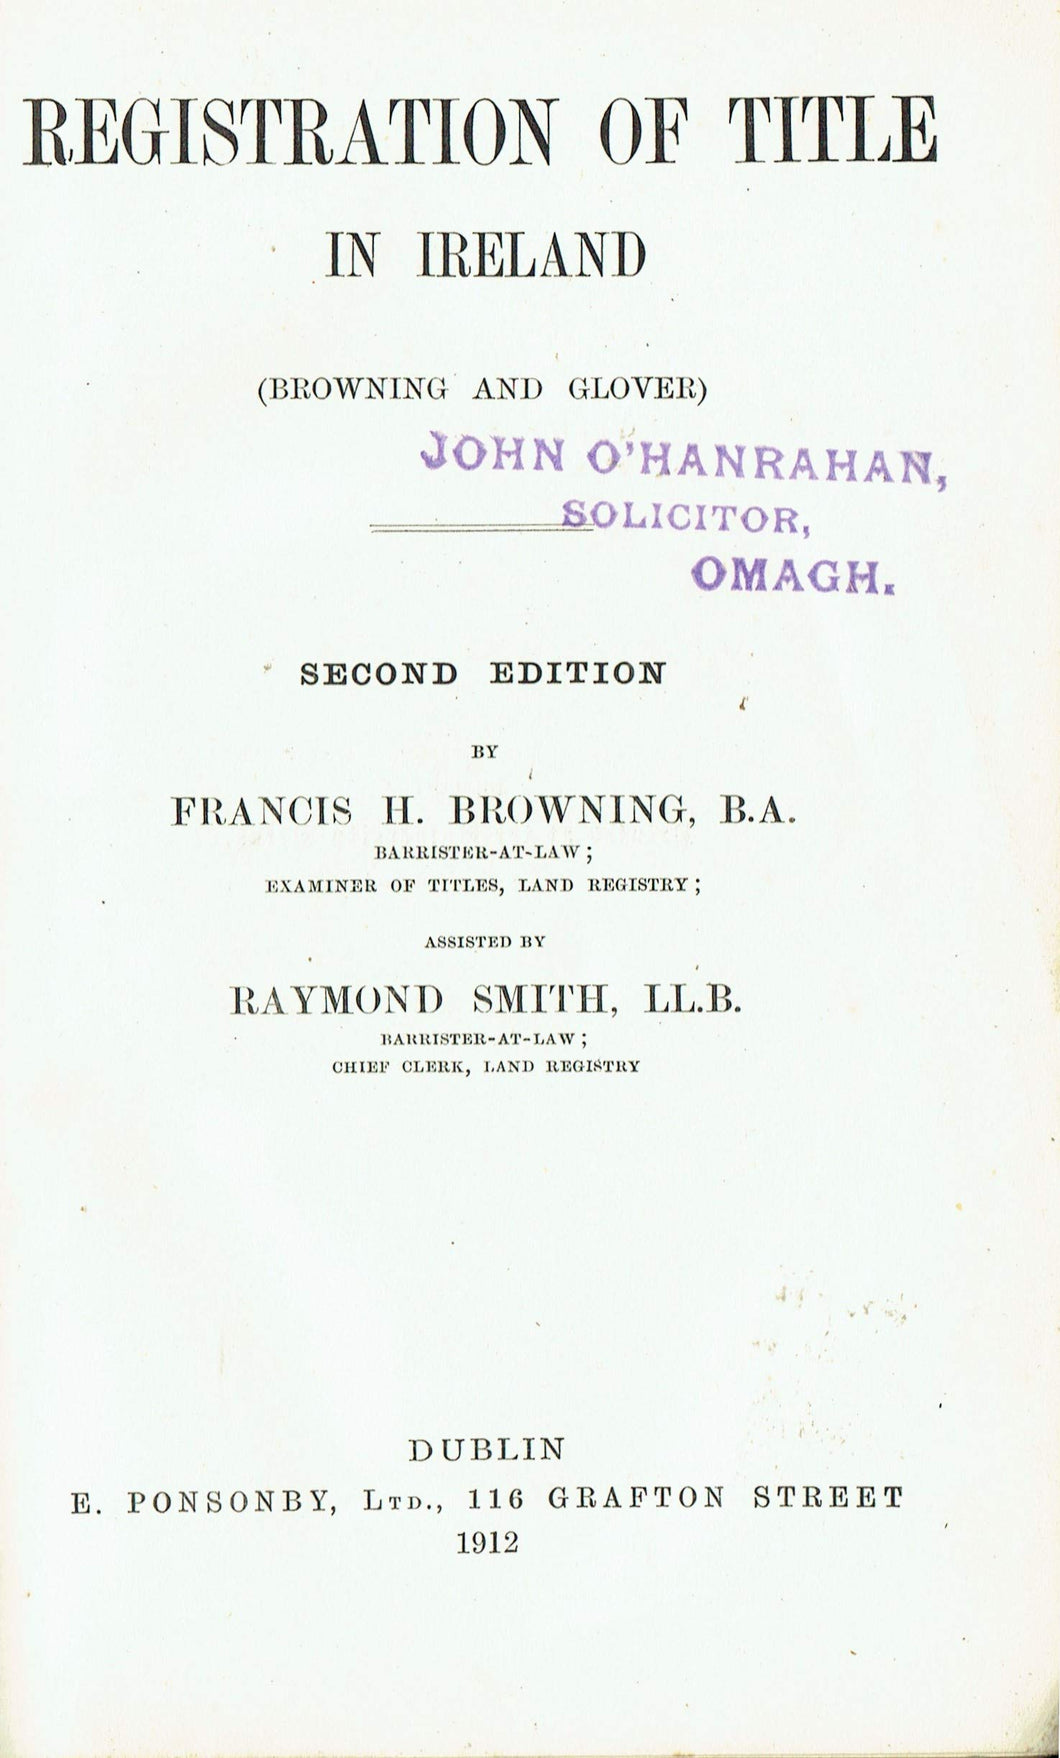 Registration of Title in Ireland (Browning and Glover) - Second Edition